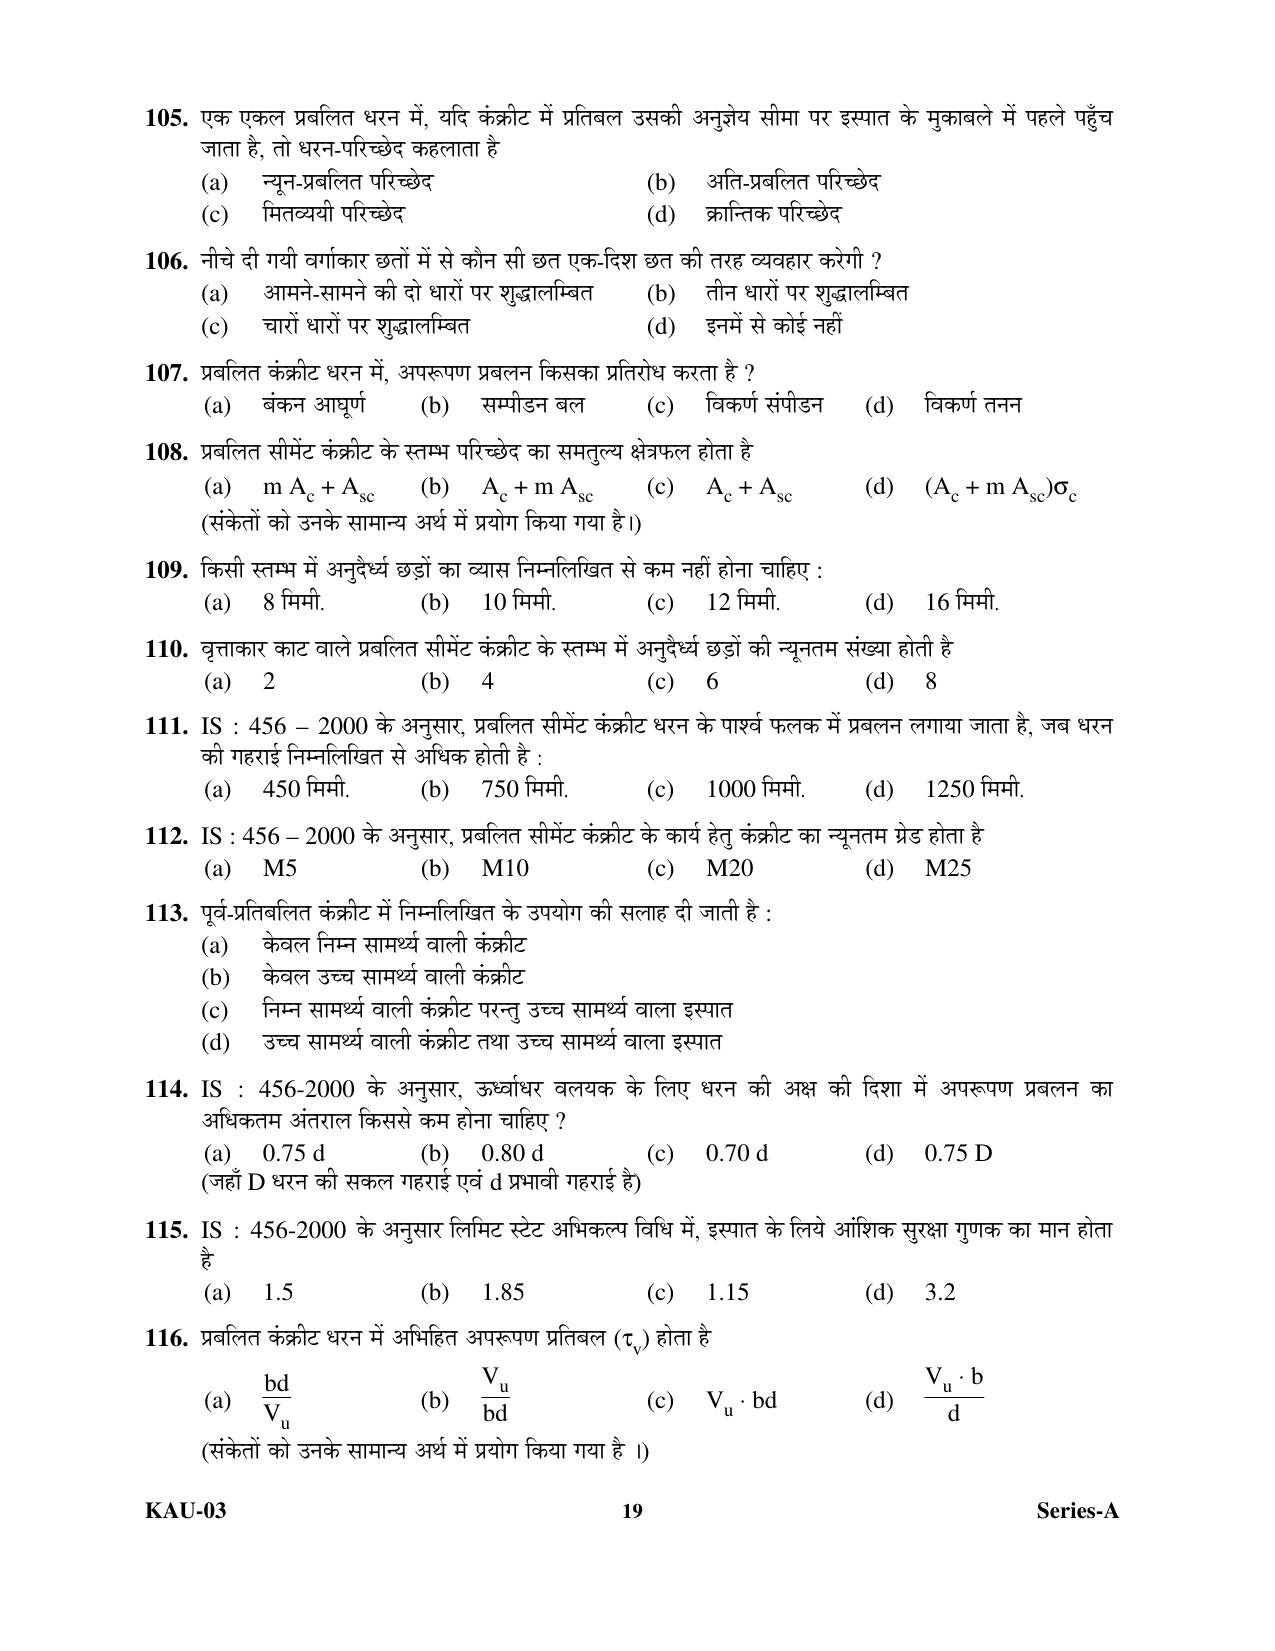 SEBI Officer Civil Engineering Previous Paper - Page 18